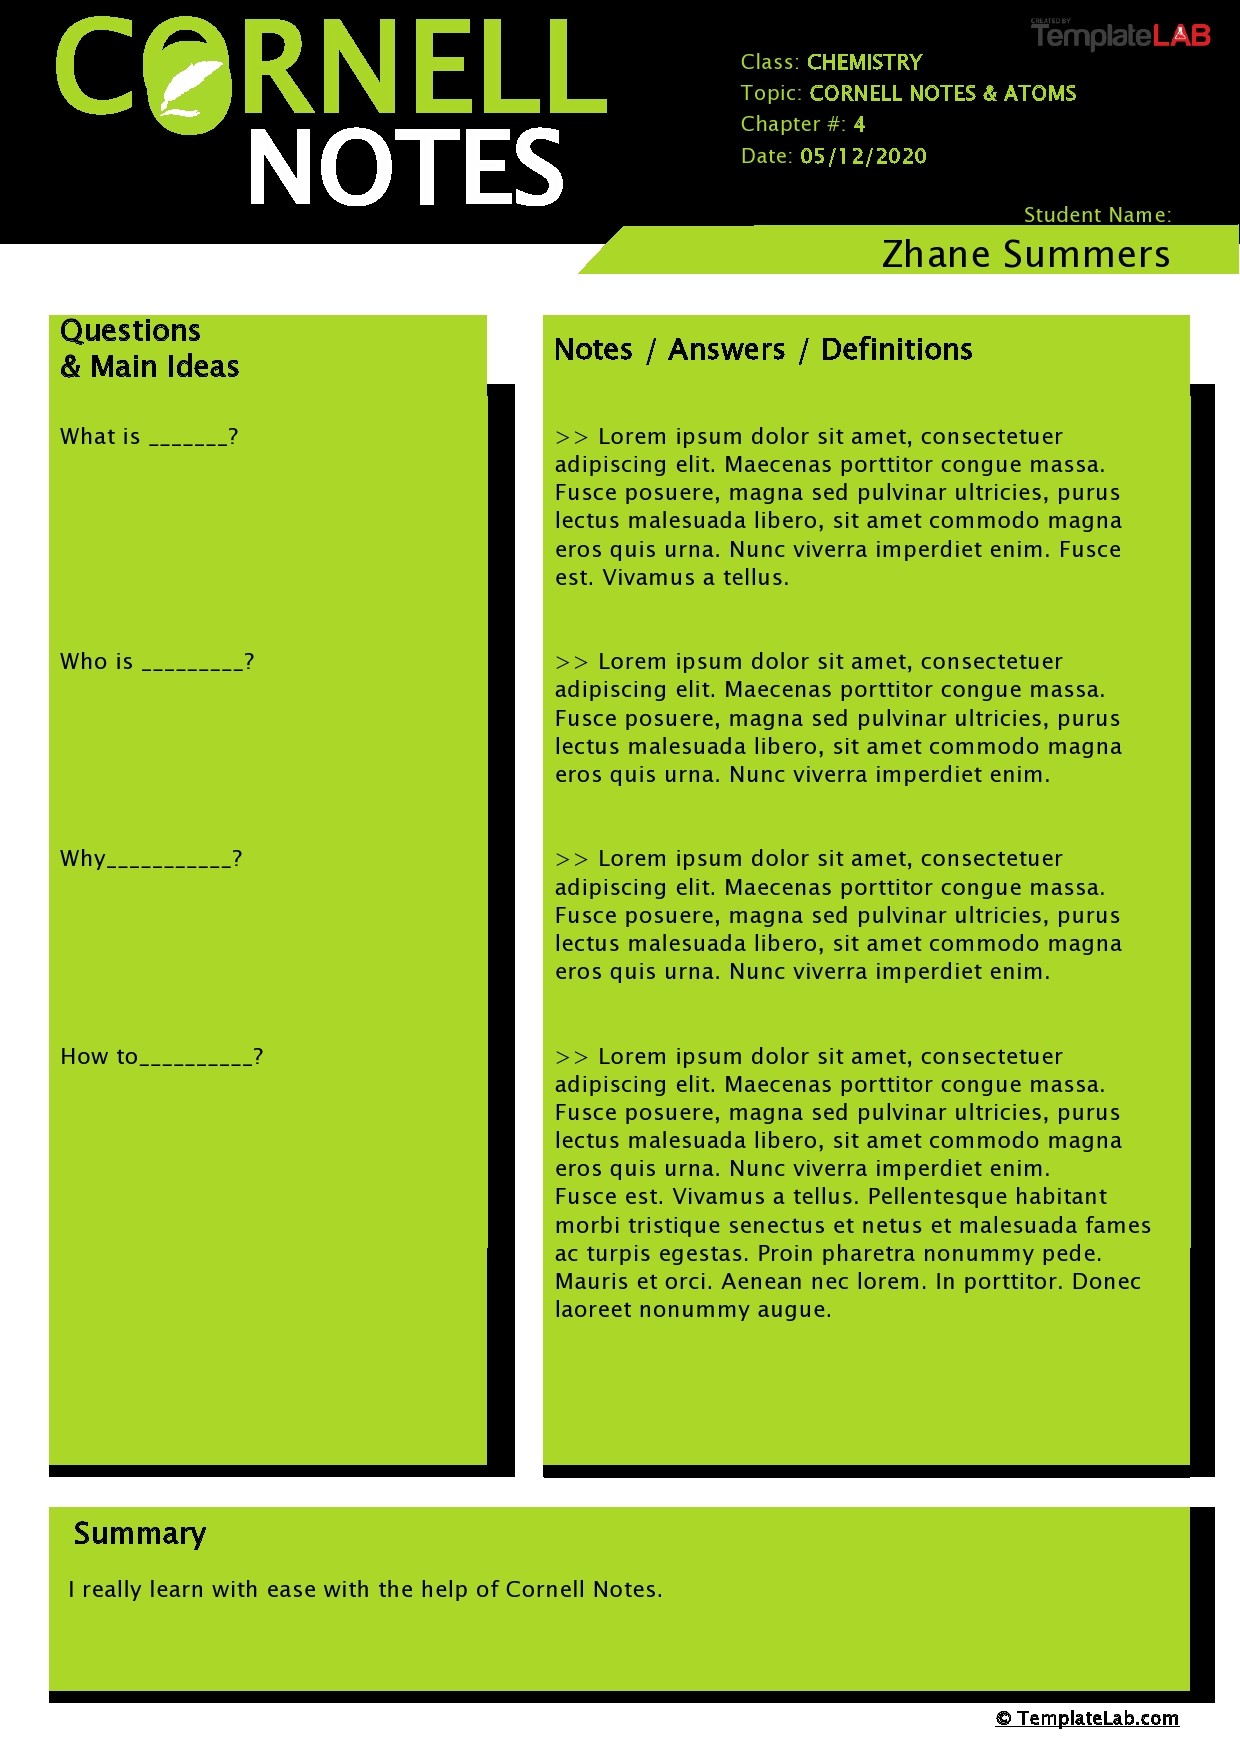 37 Cornell Notes Templates & Examples [Word, Excel, PDF] ᐅ